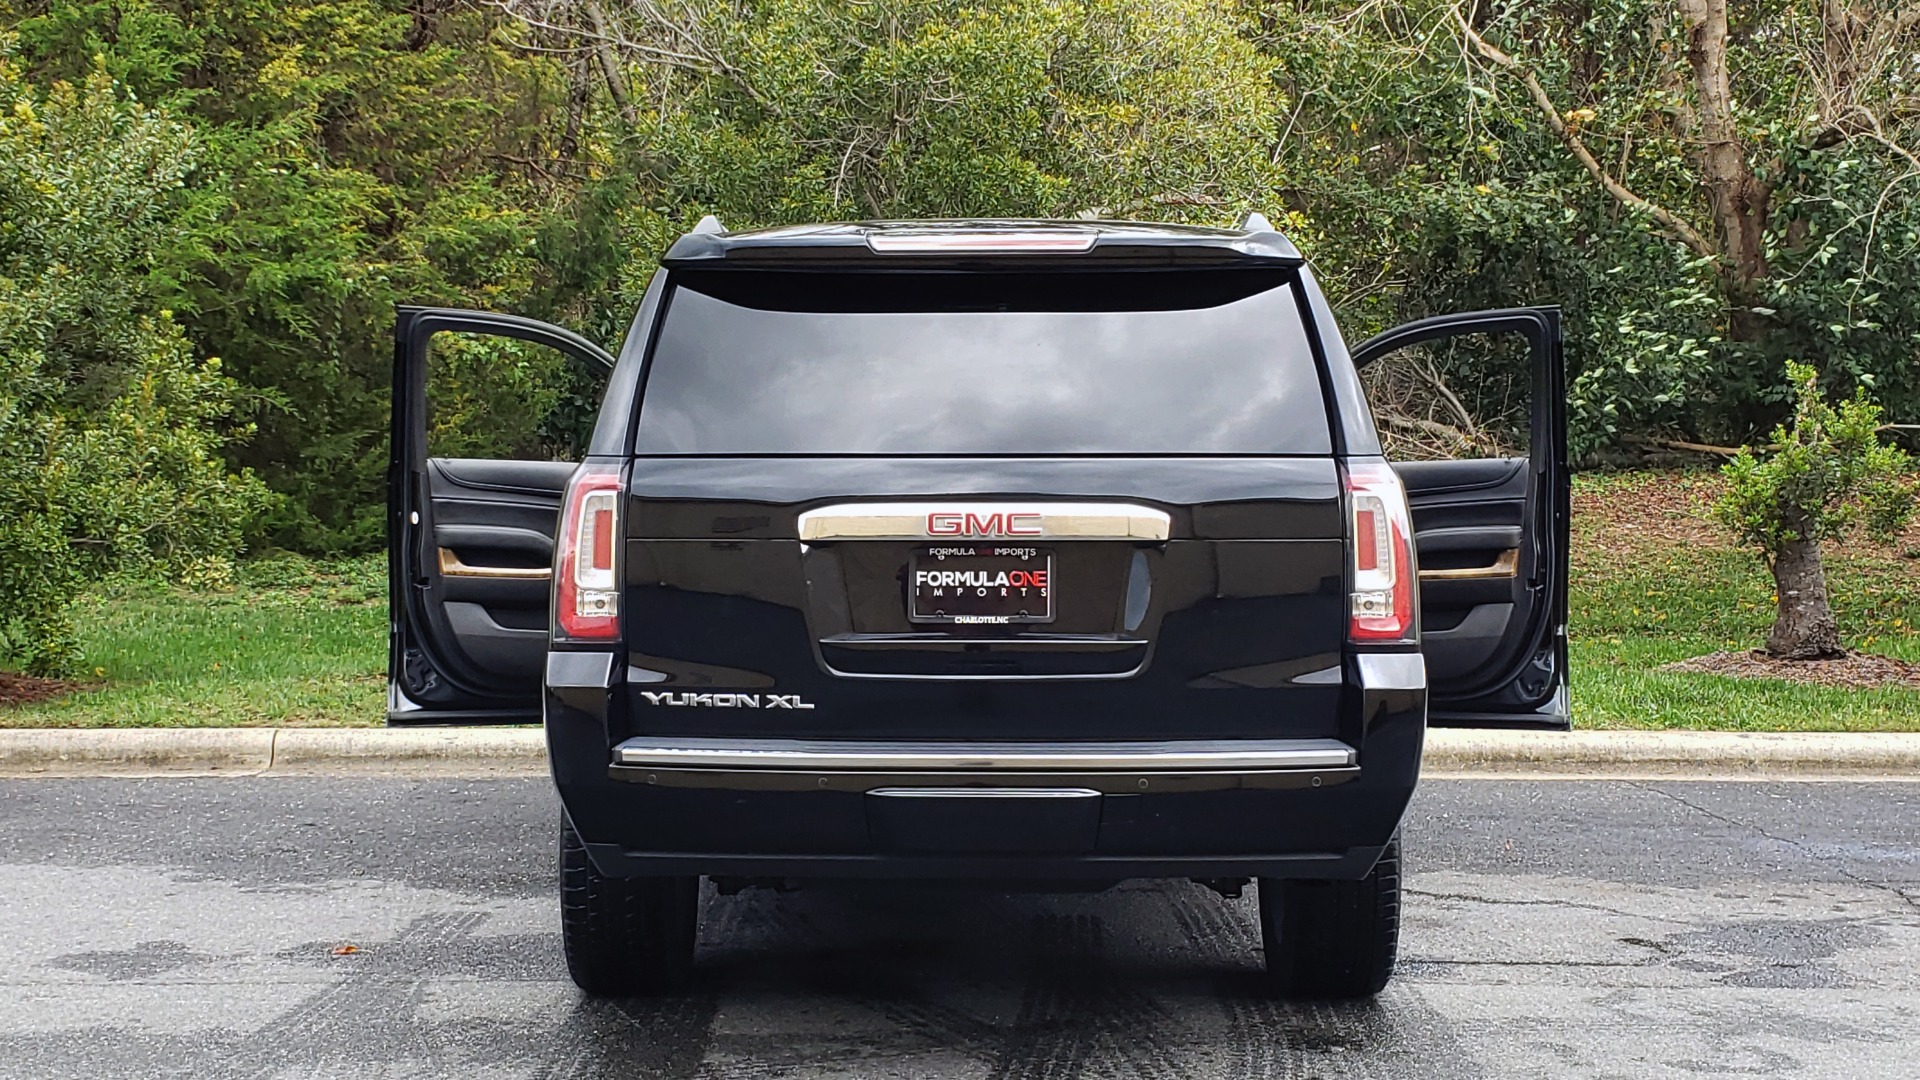 Used 2017 GMC YUKON XL DENALI 4WD / NAV / SUNROOF / ENT / 3-ROWS / BOSE / REARVIEW for sale Sold at Formula Imports in Charlotte NC 28227 28